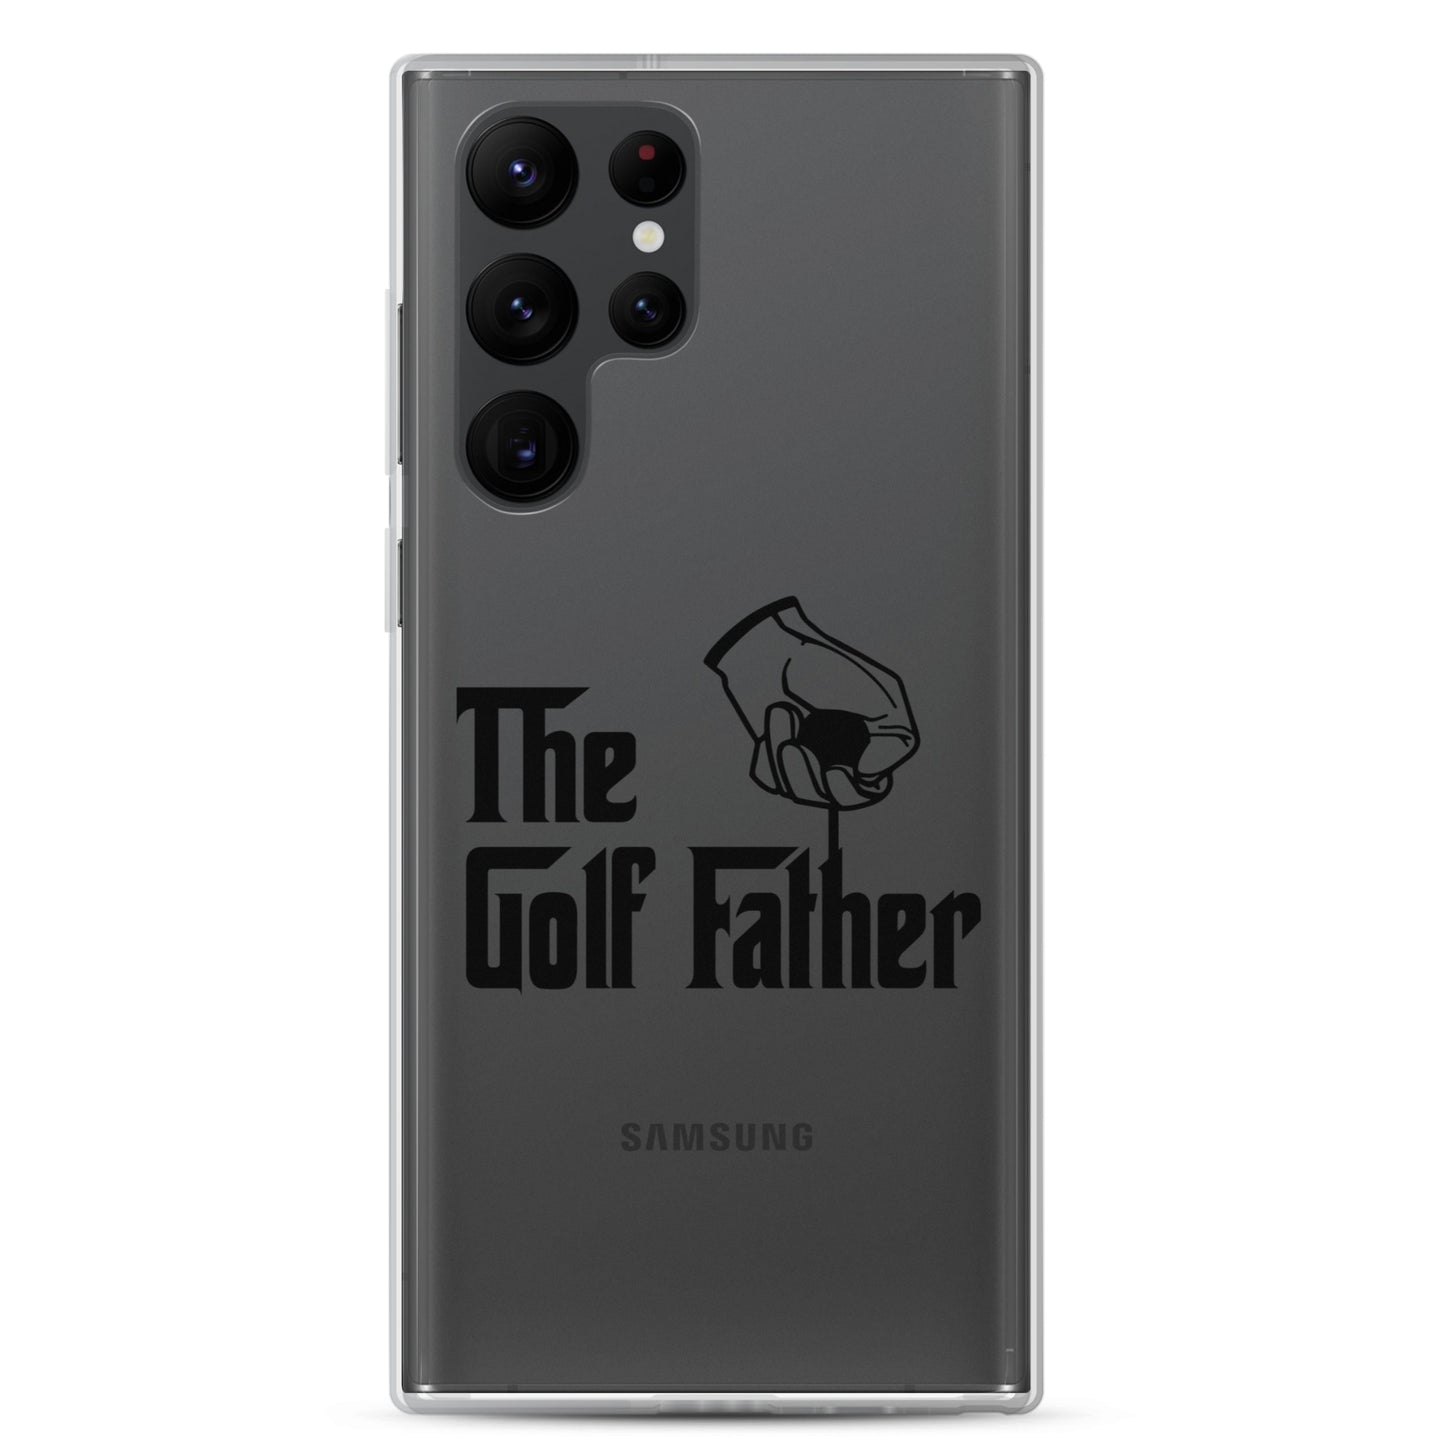 The Golf Father Samsung Case